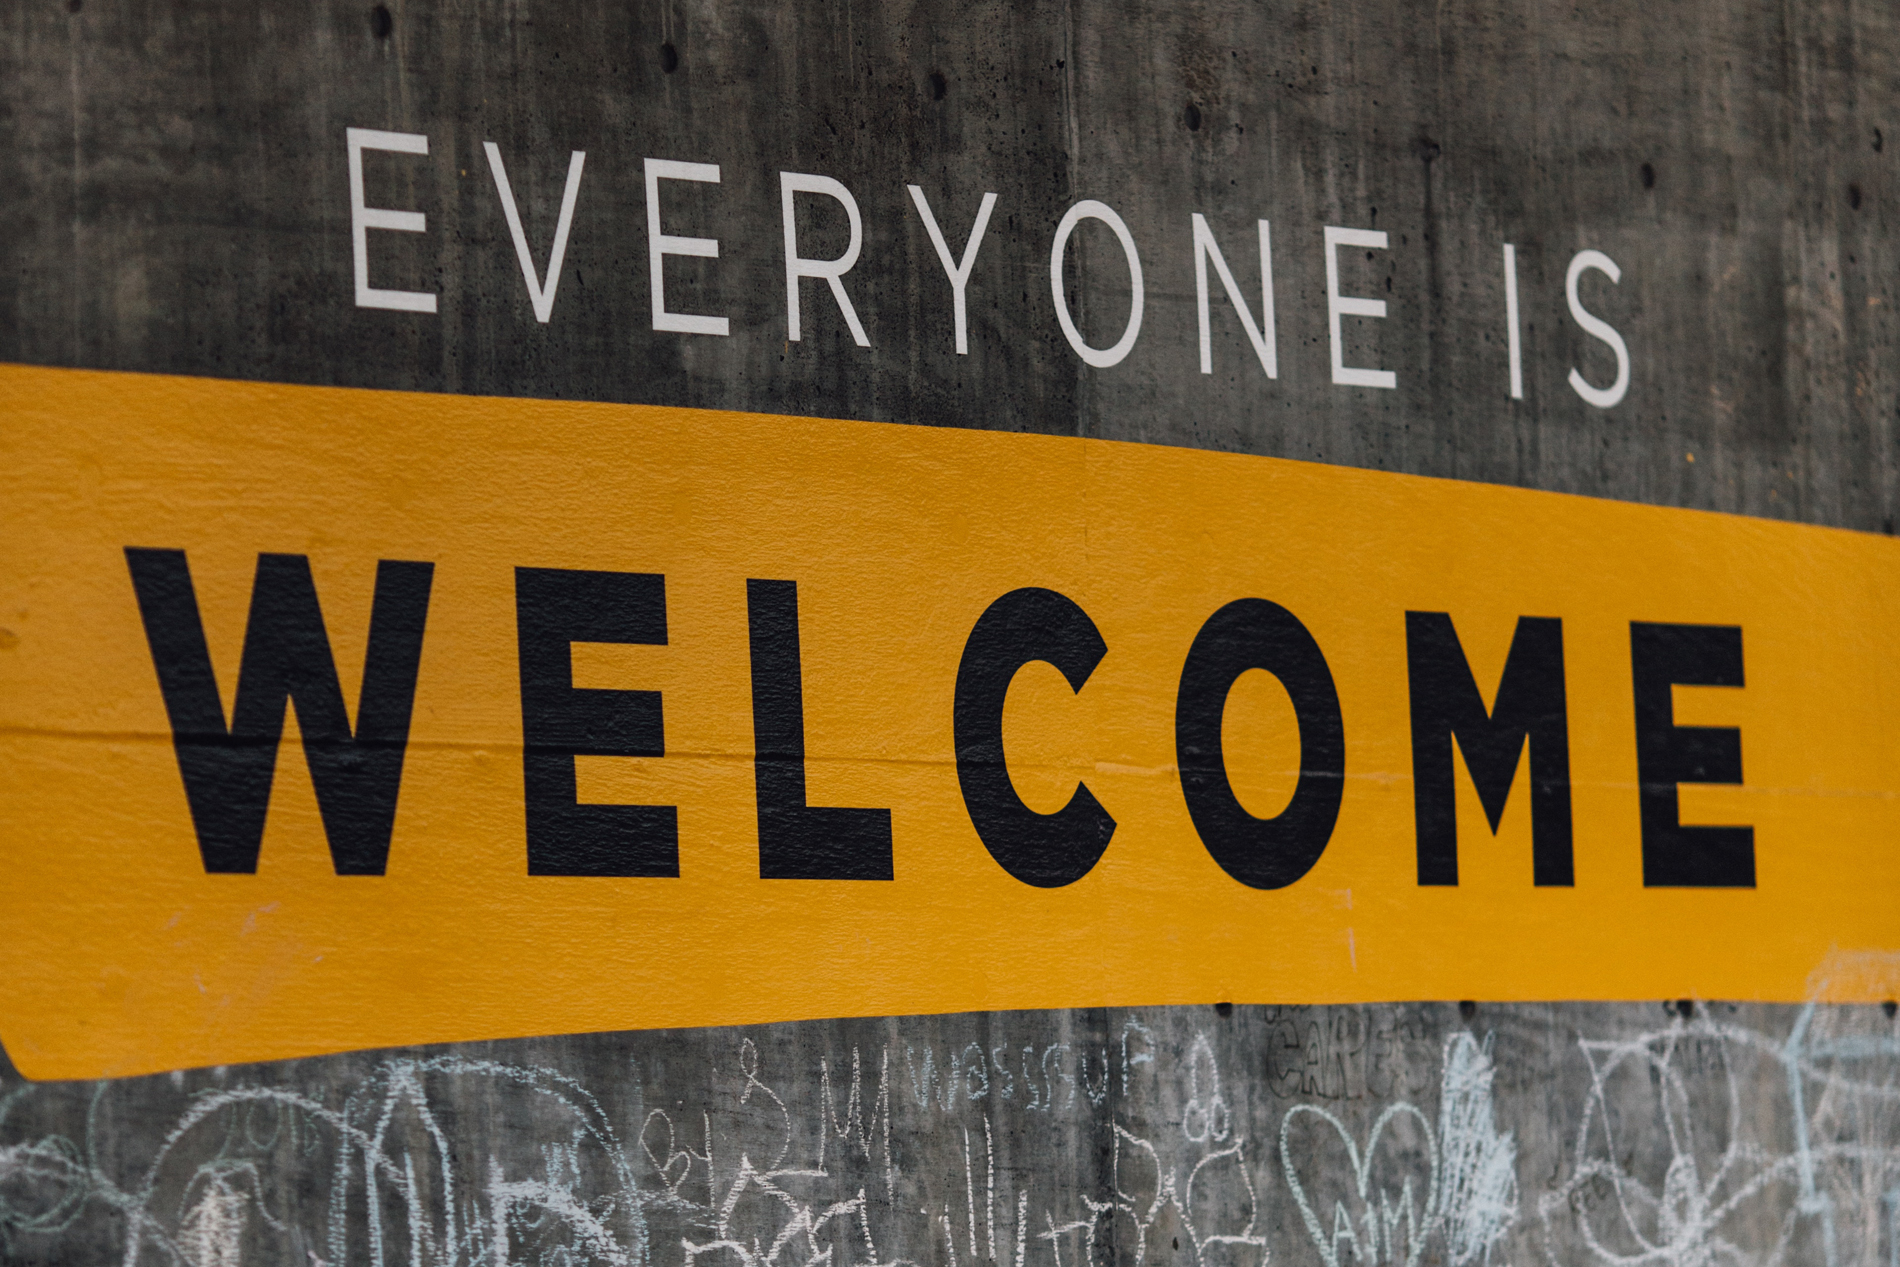 Sign on wall: Everyone is welcome (Credit: Katy Moum, Unsplash. Cropped from original)